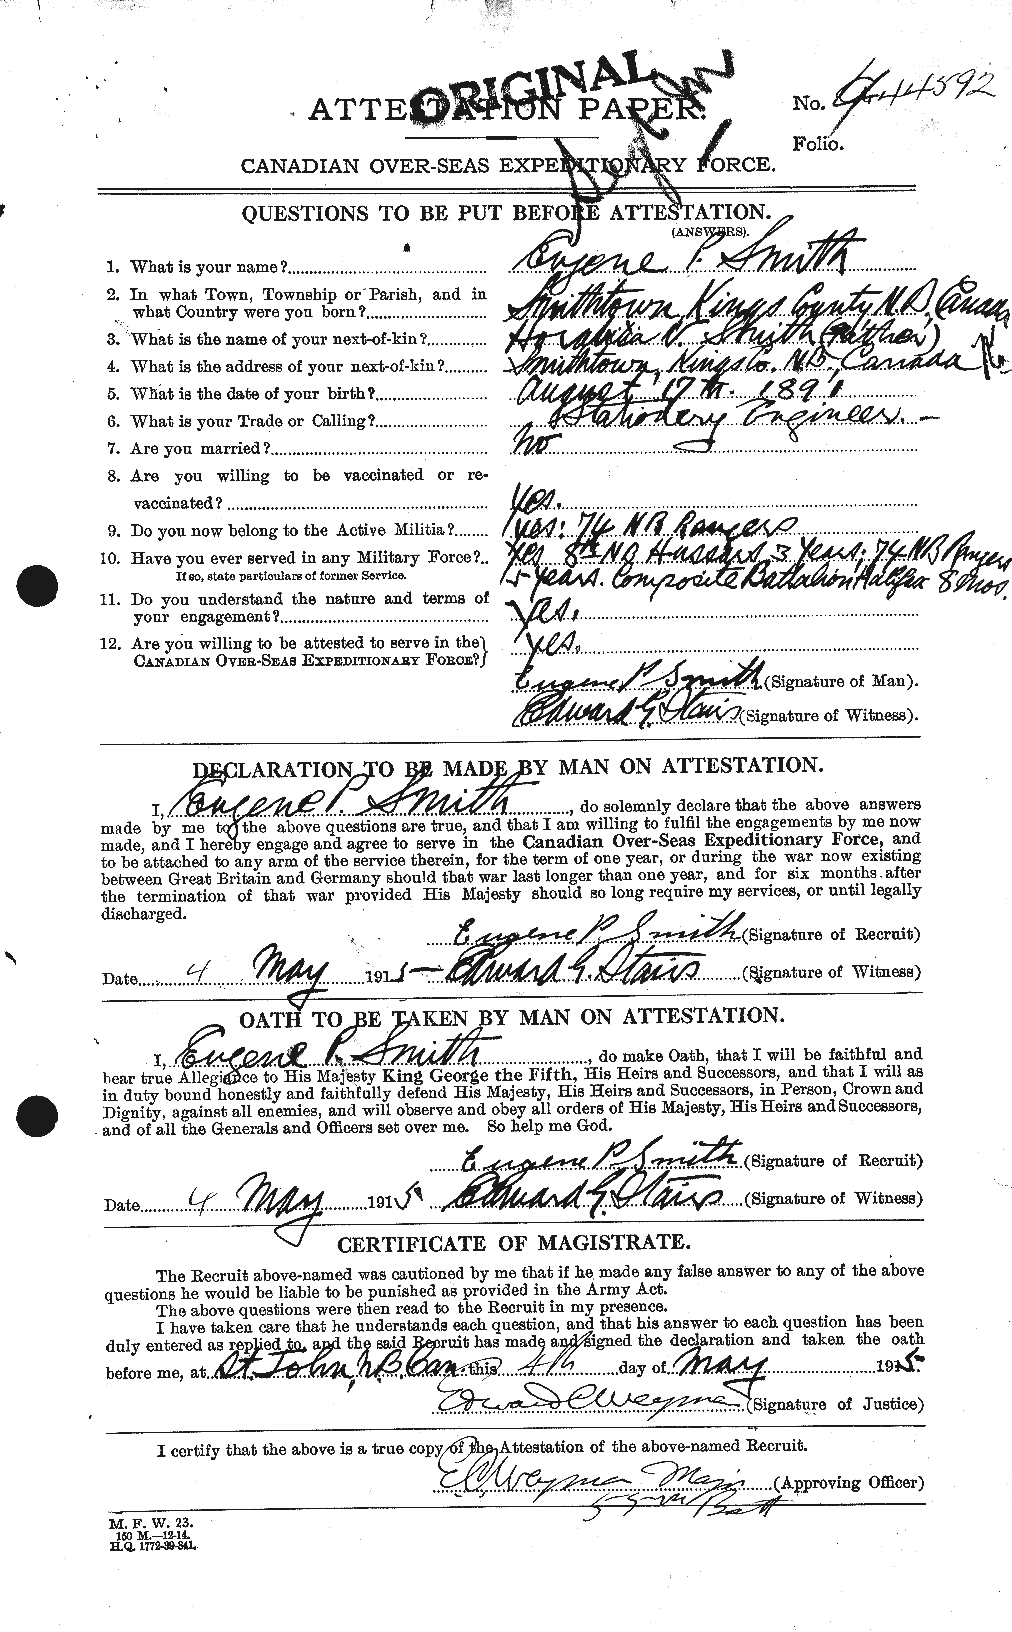 Personnel Records of the First World War - CEF 621235a